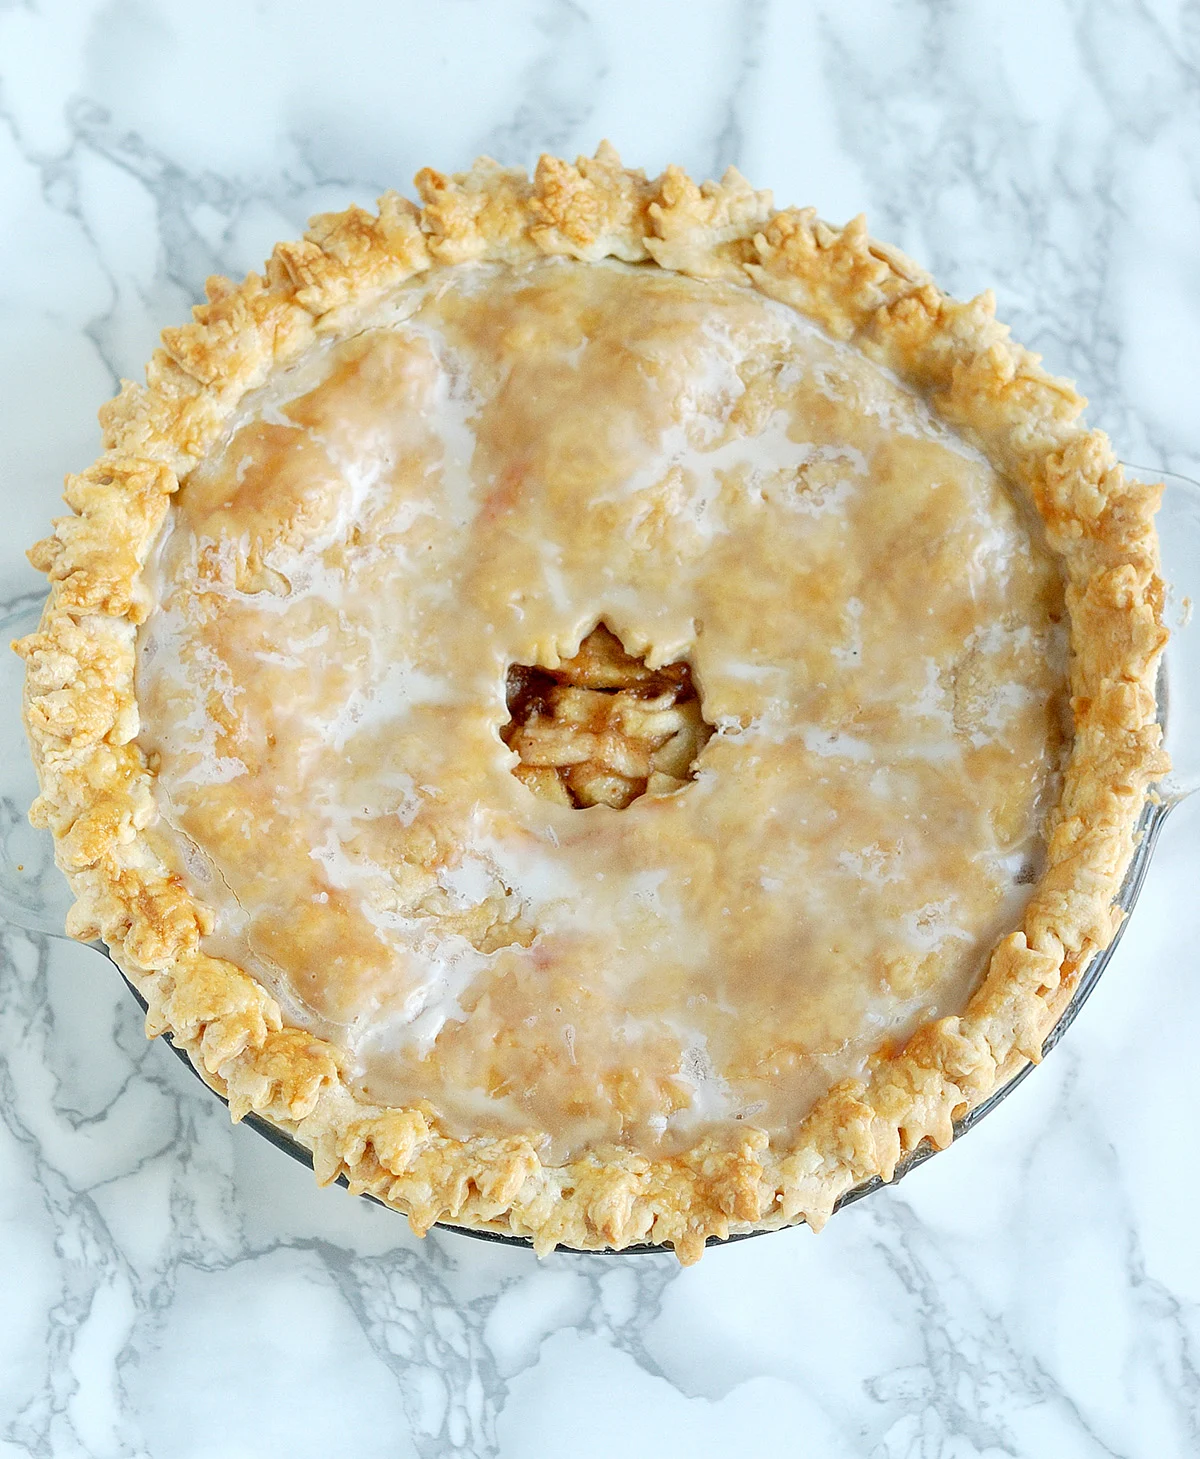 an apple pie on a white surface.